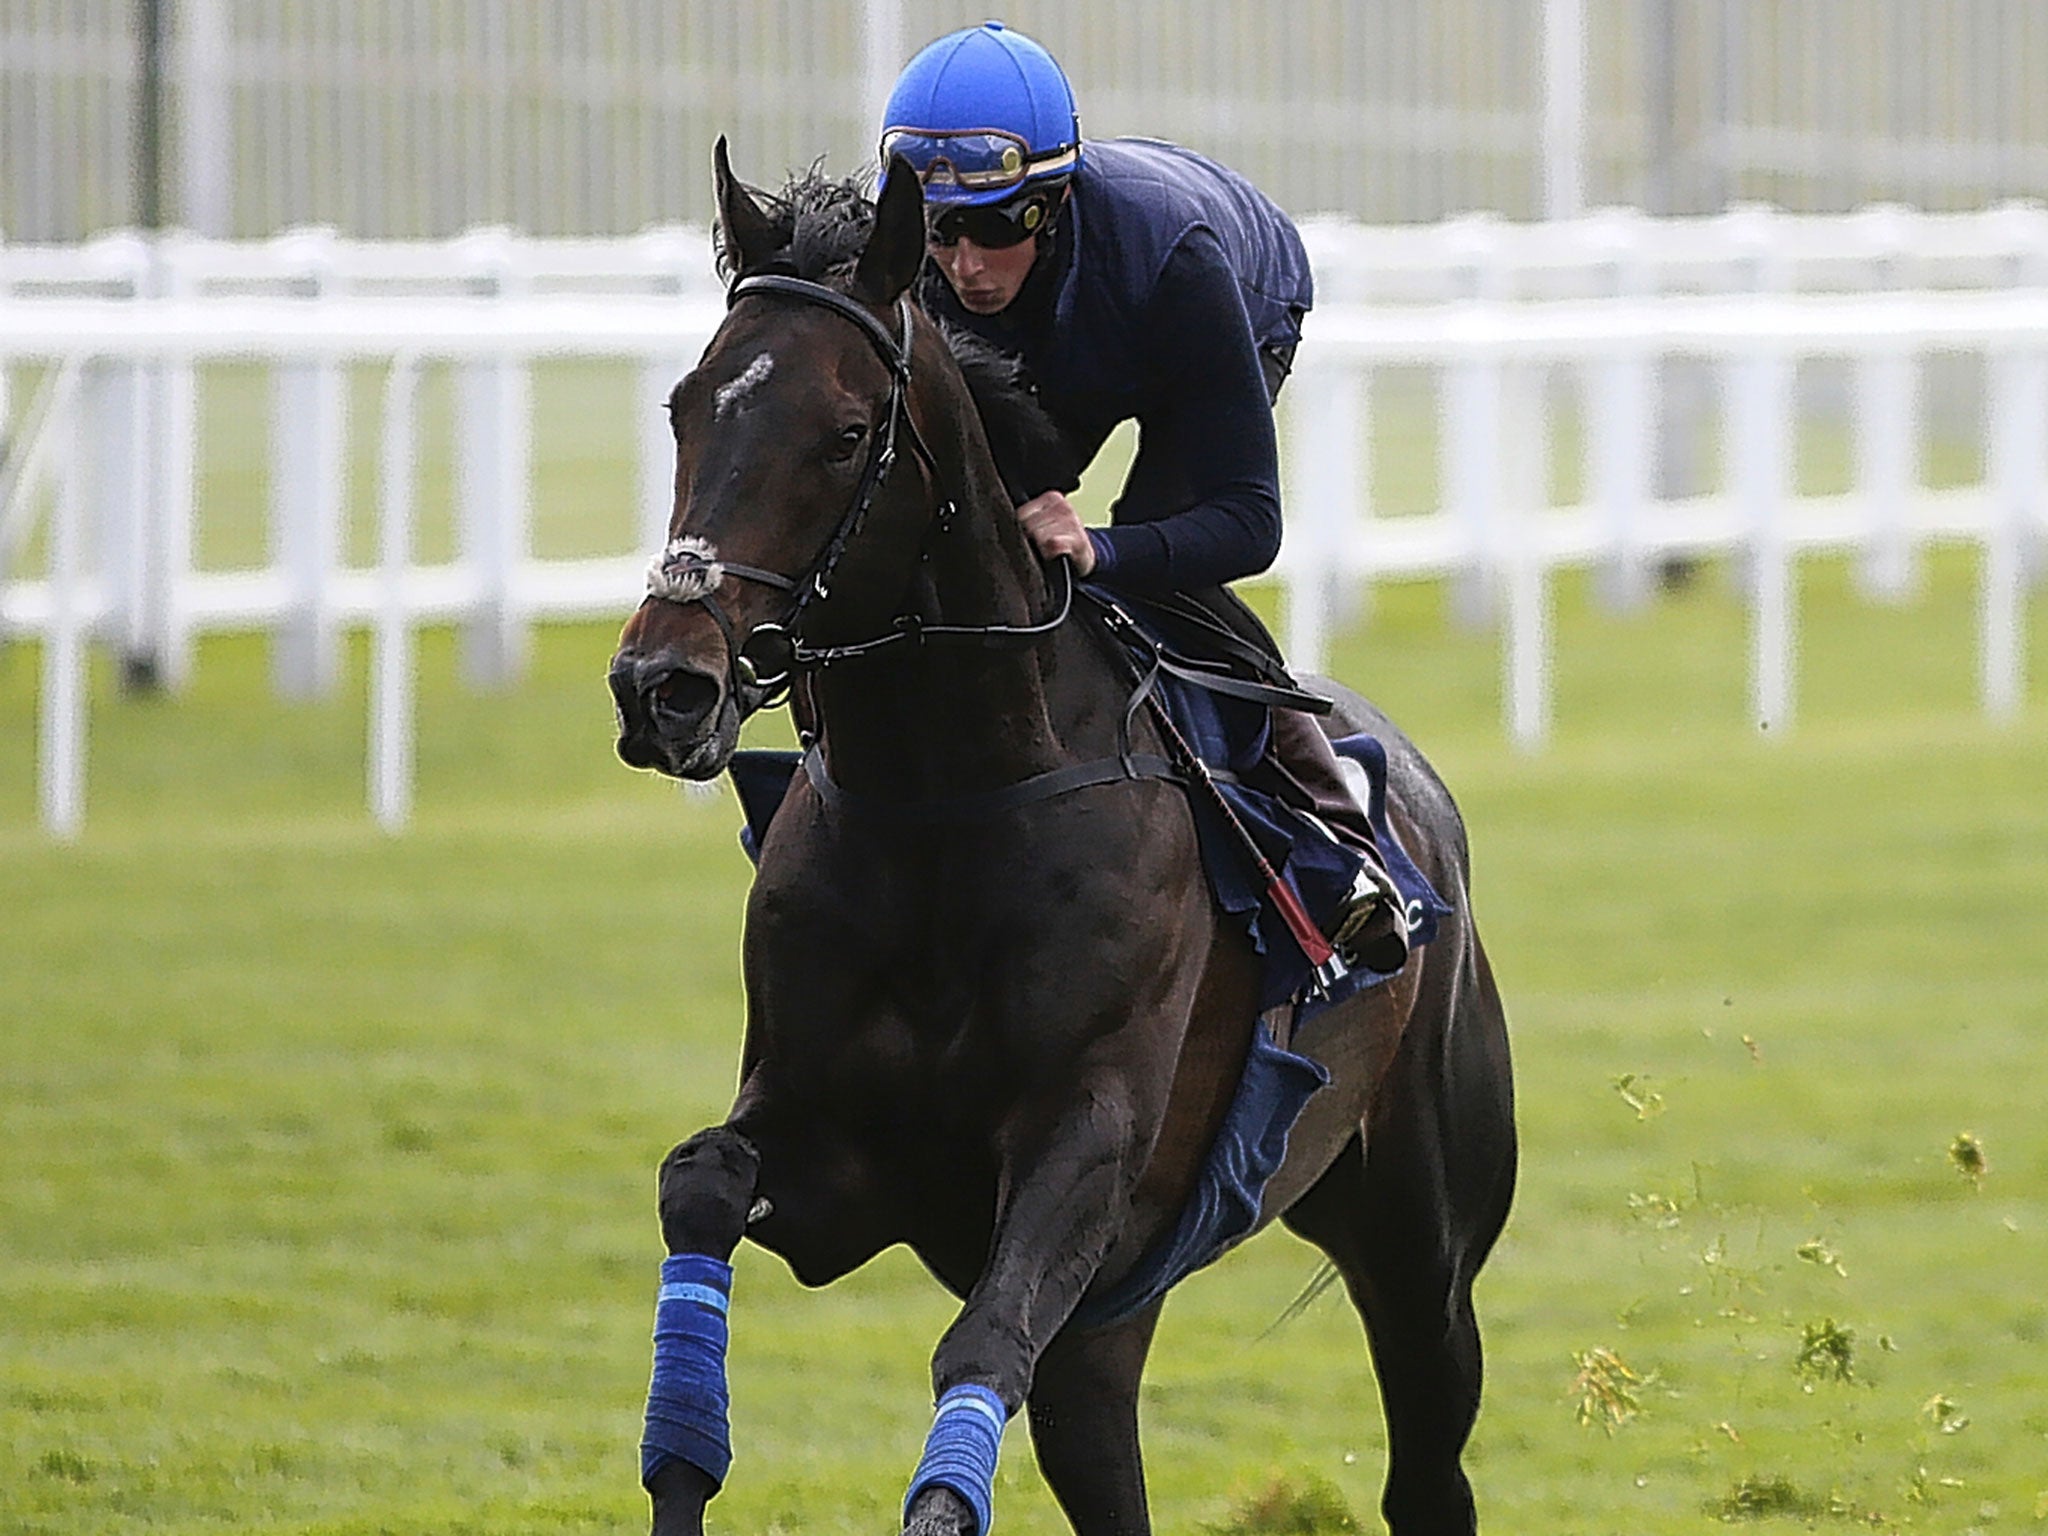 William Buick rides Jack Hobbs during a racecourse gallop last week at Epsom, where he will partner him in the Derby